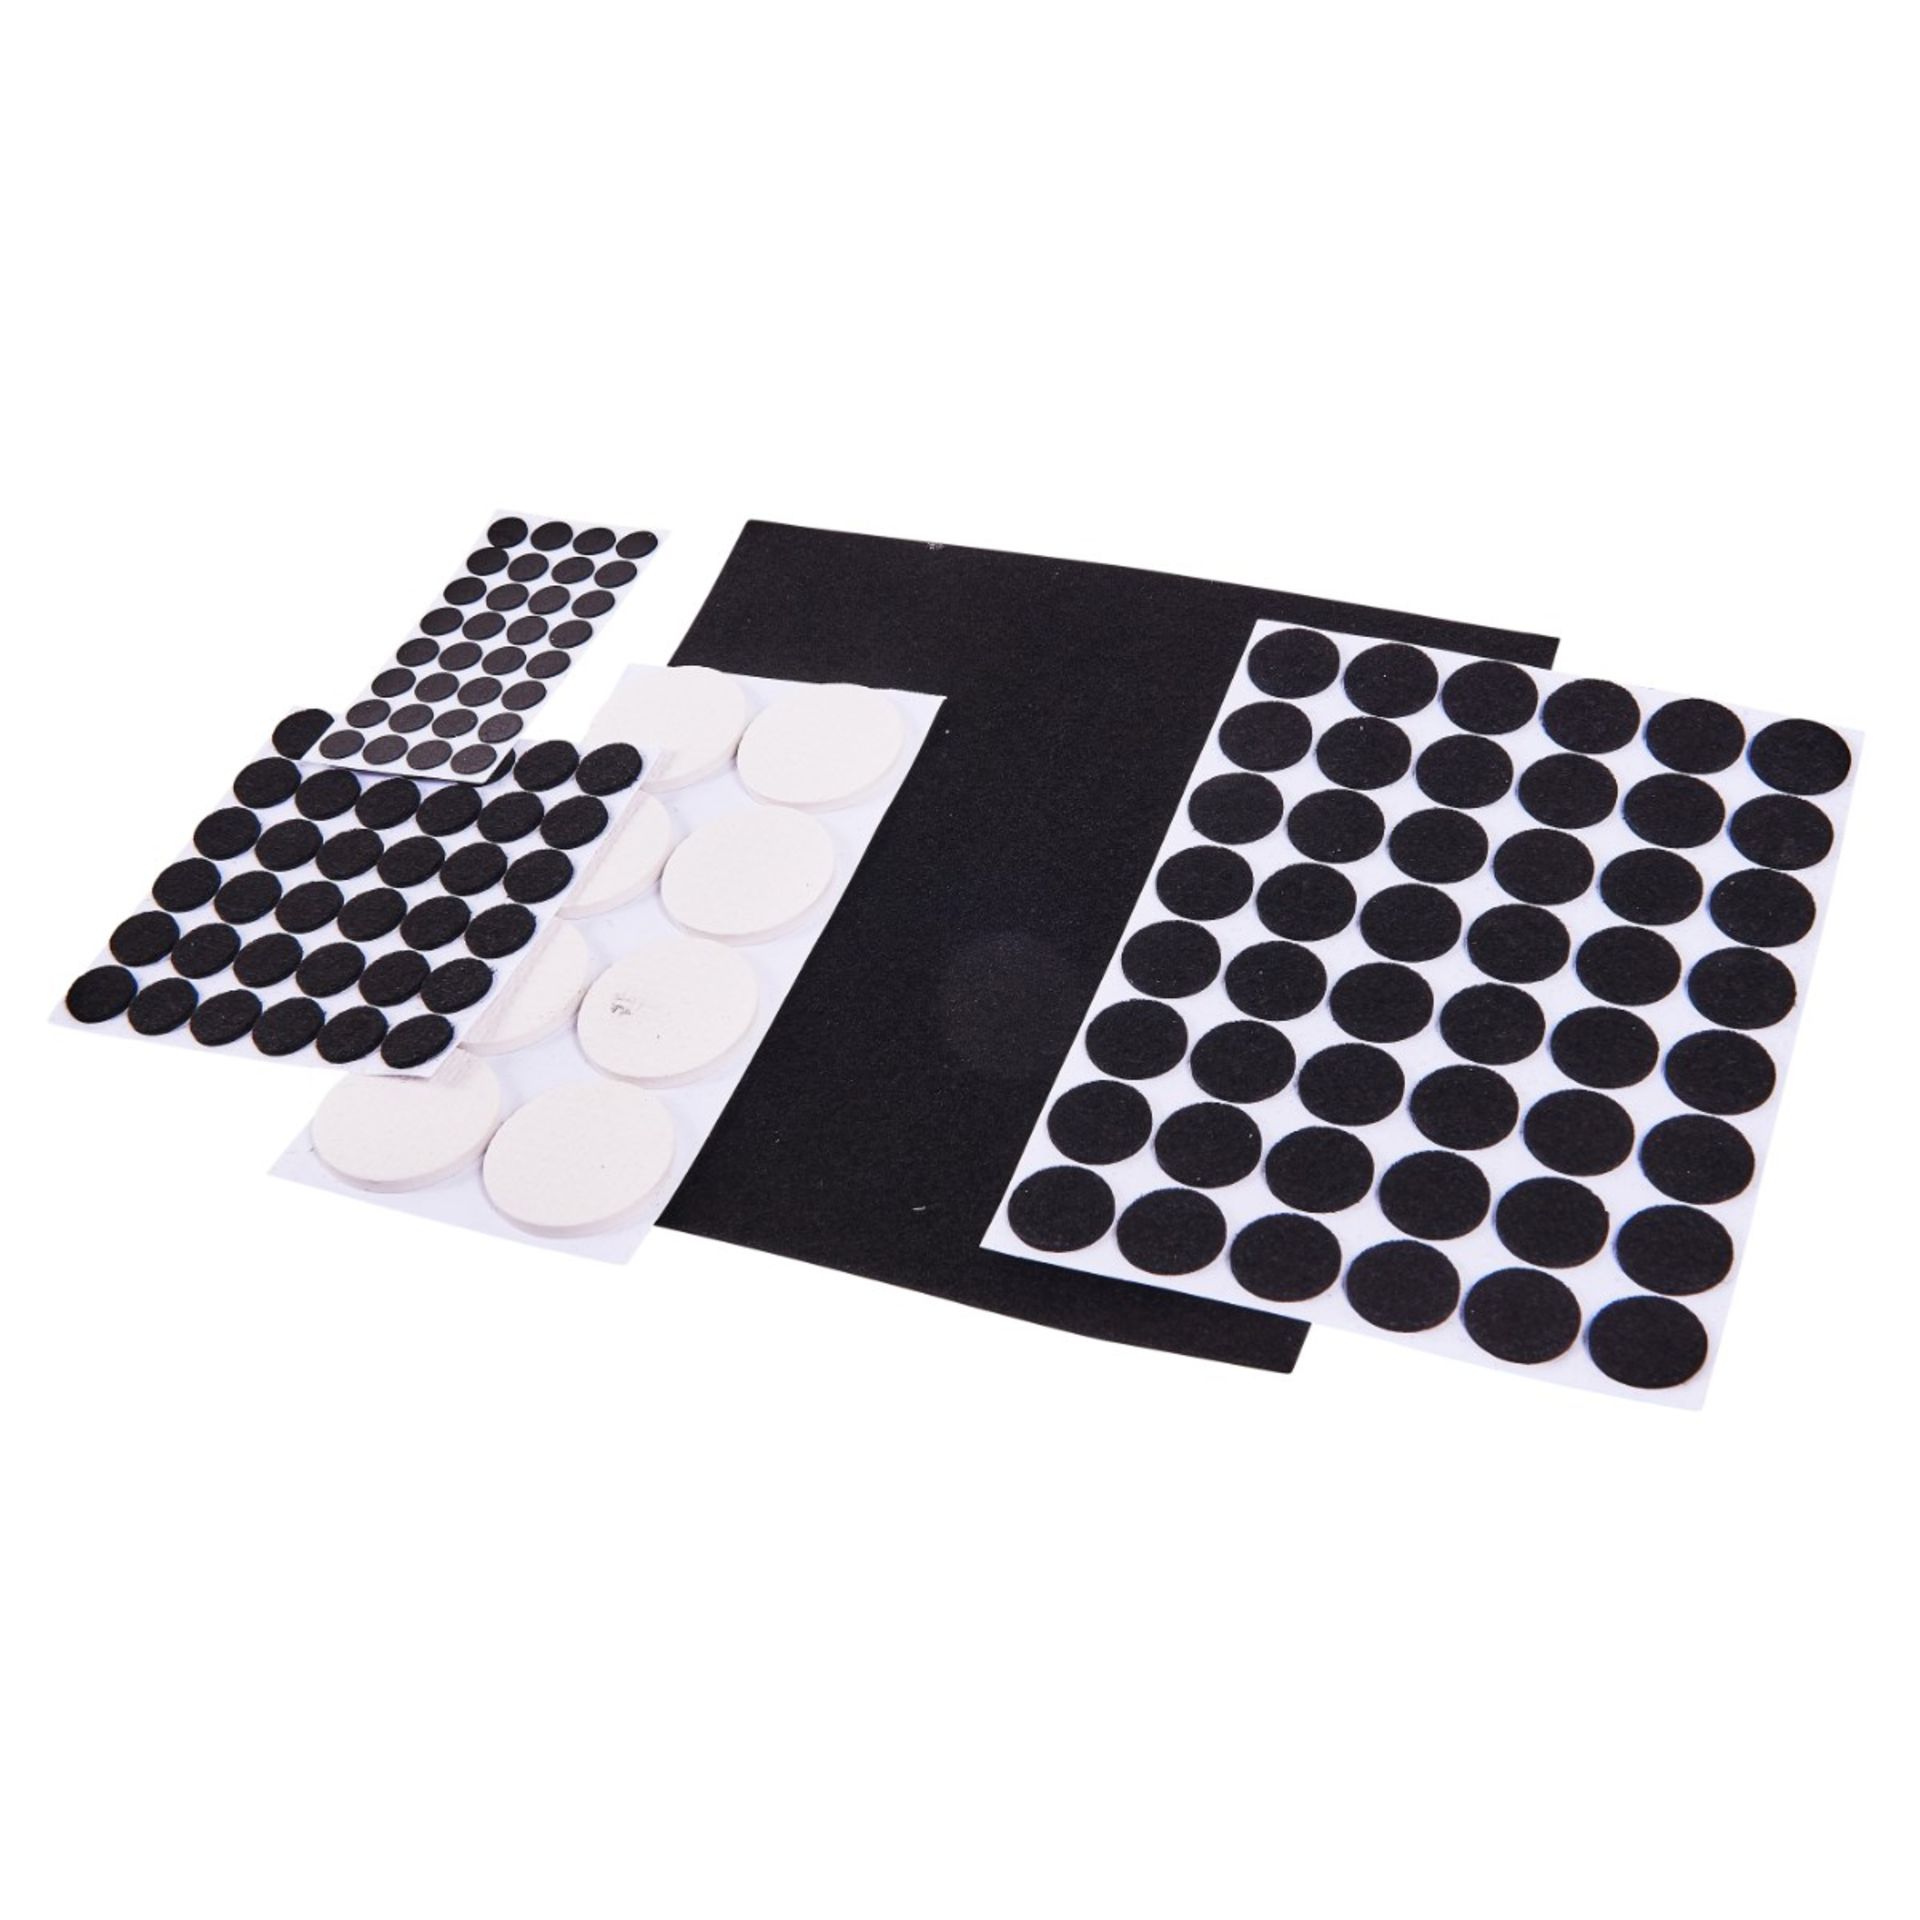 x2 New Packs Of 125 Floor Protection Furniture Pads